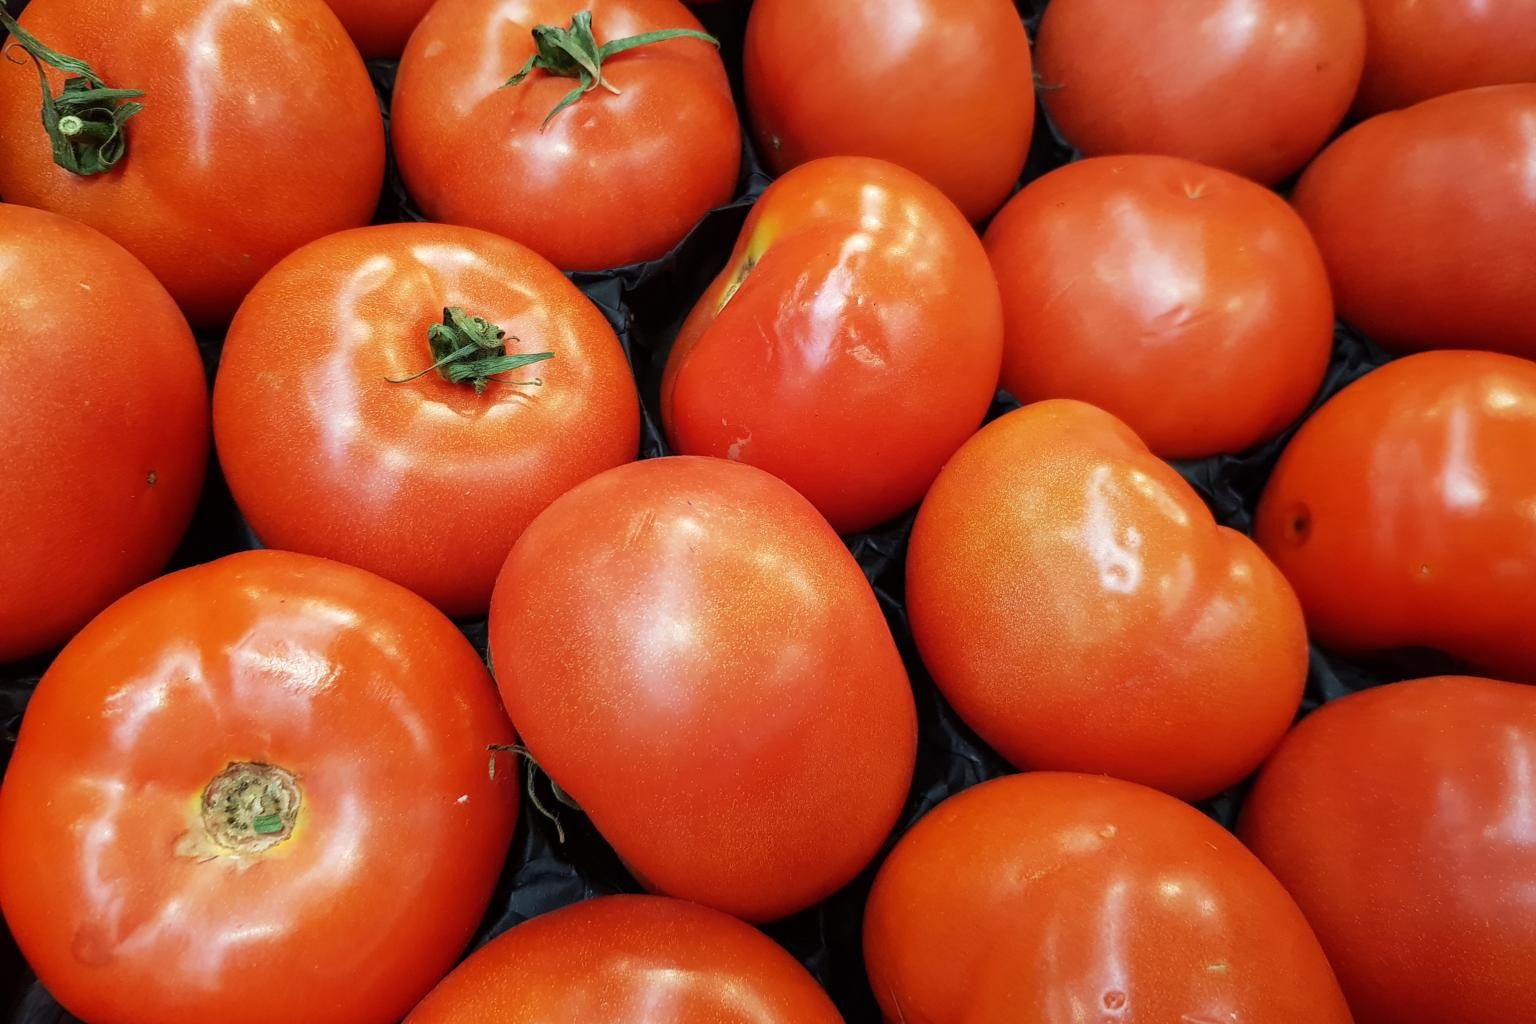 Conventionally Grown Tomatoes